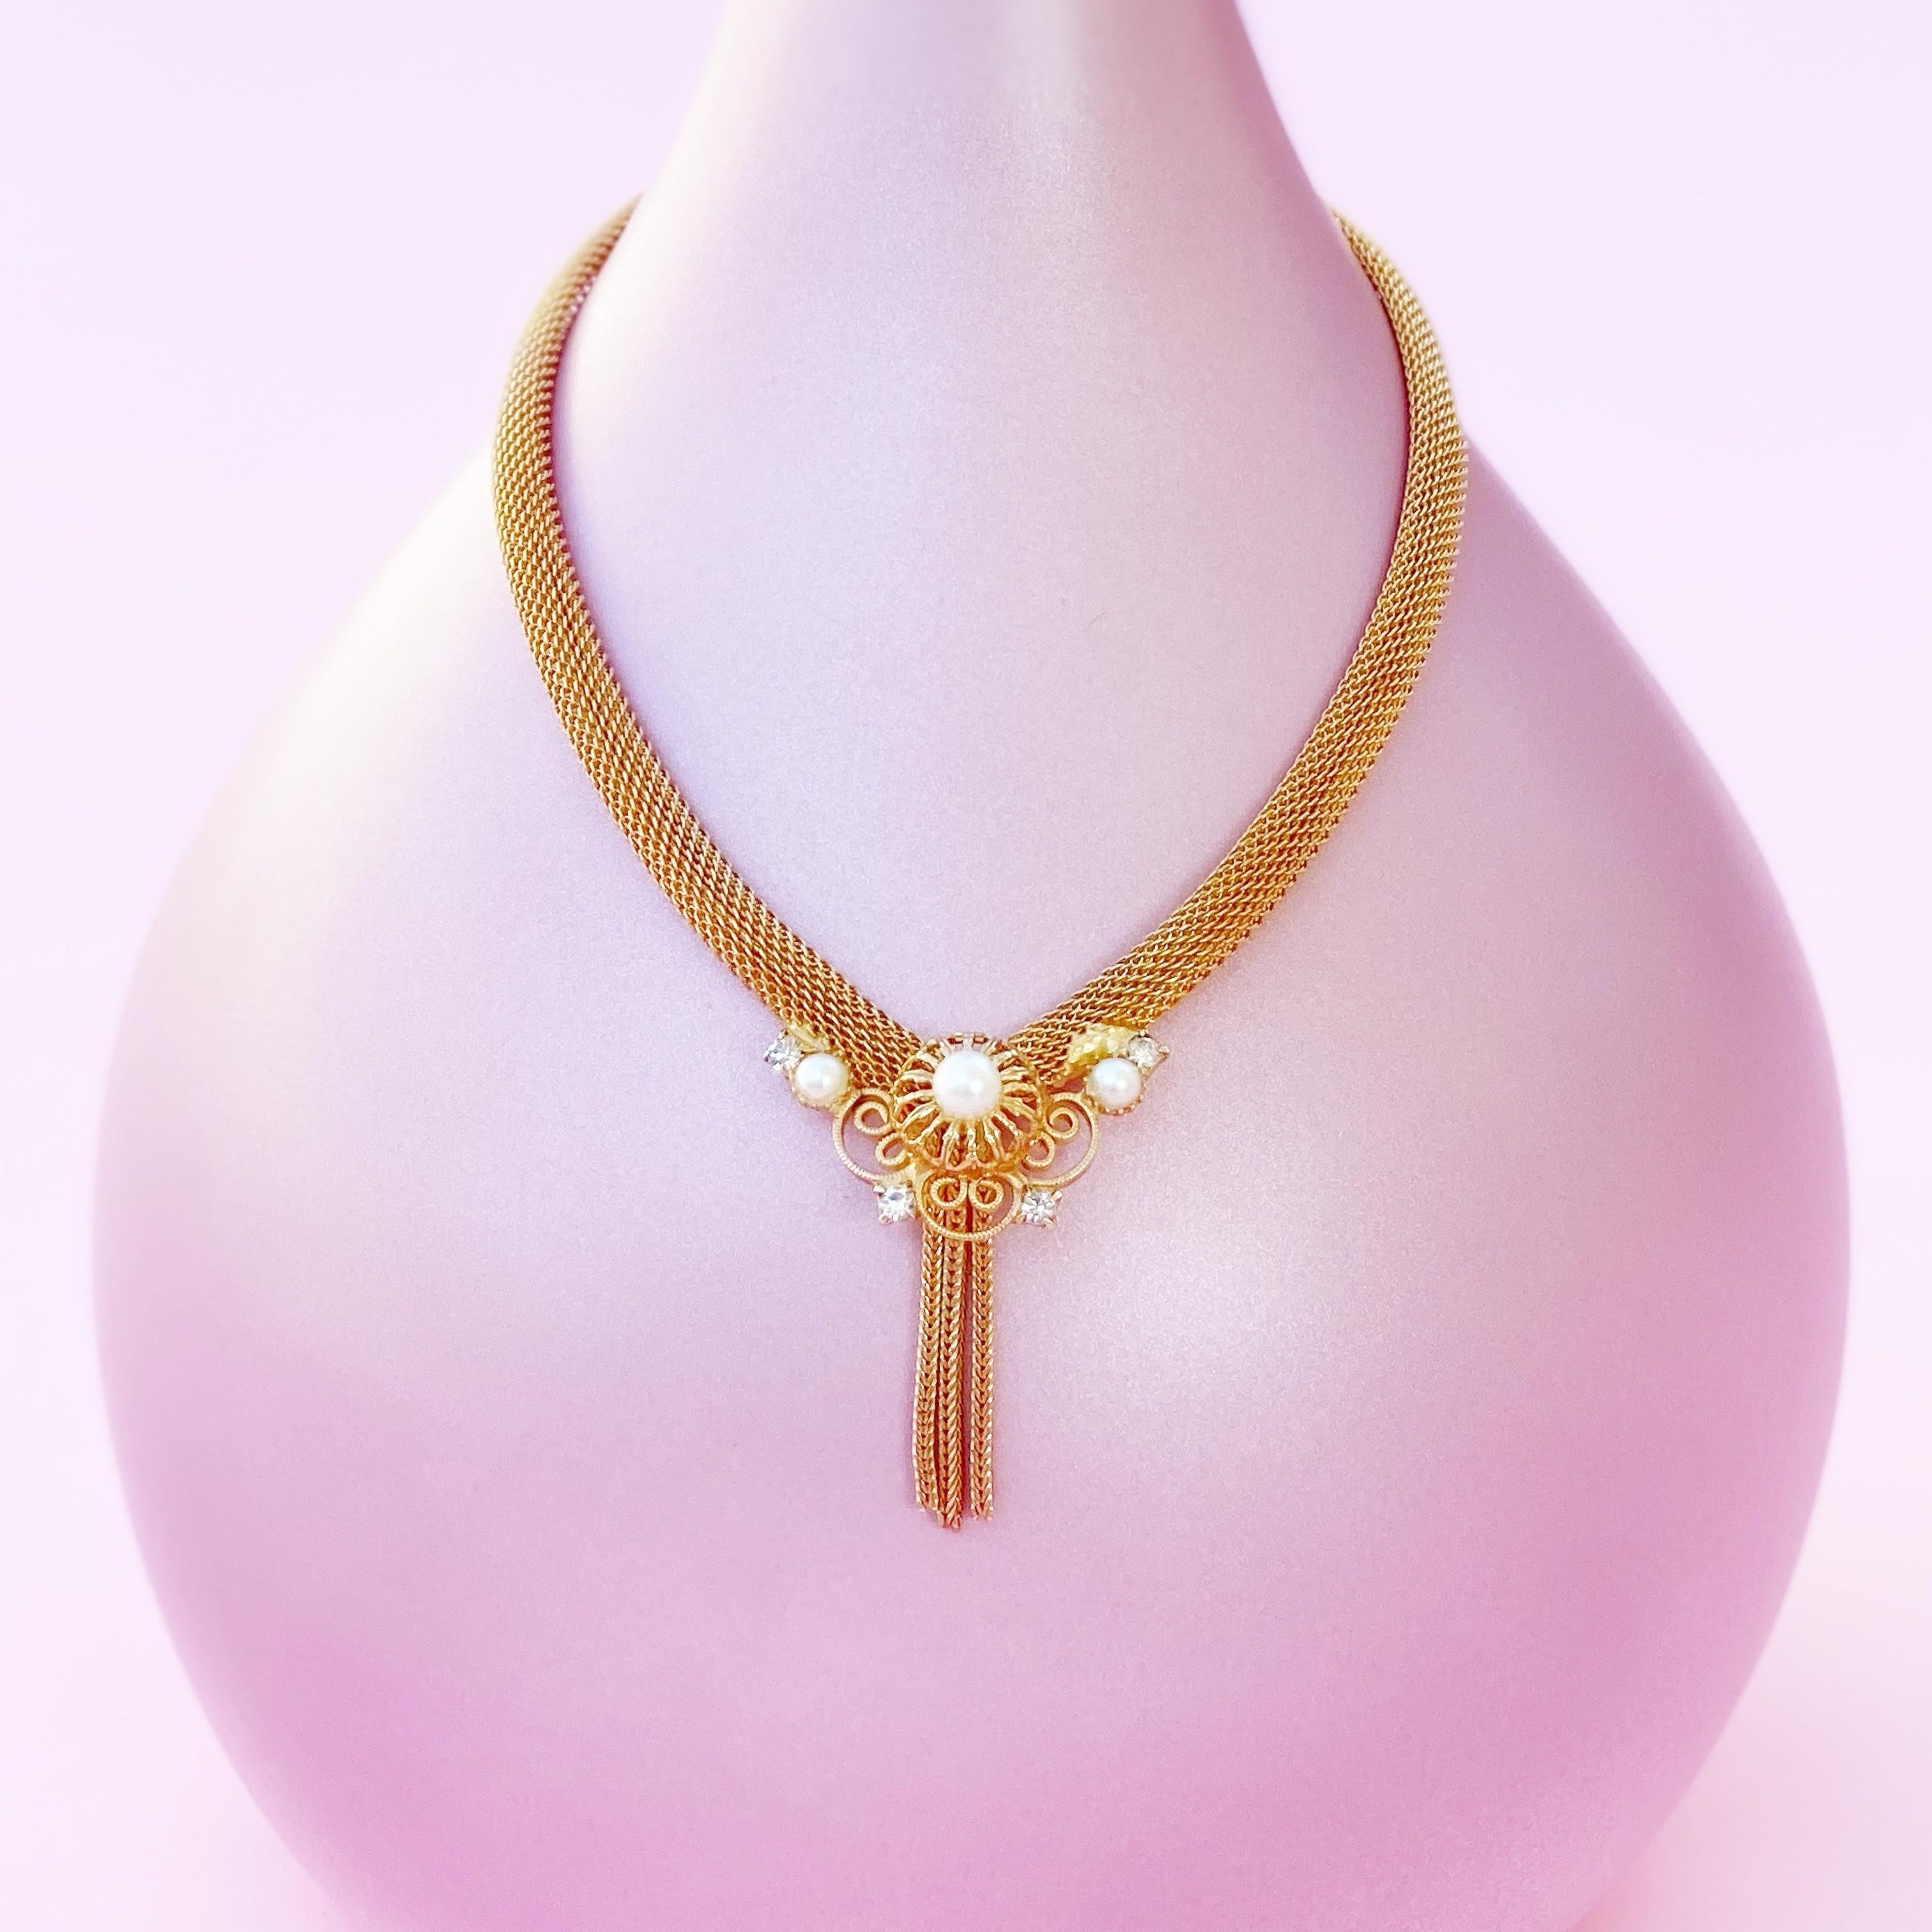 Modern 1960s Gold Mesh Choker Necklace With Faux Pearl & Tassel By Lisa Jewels Co